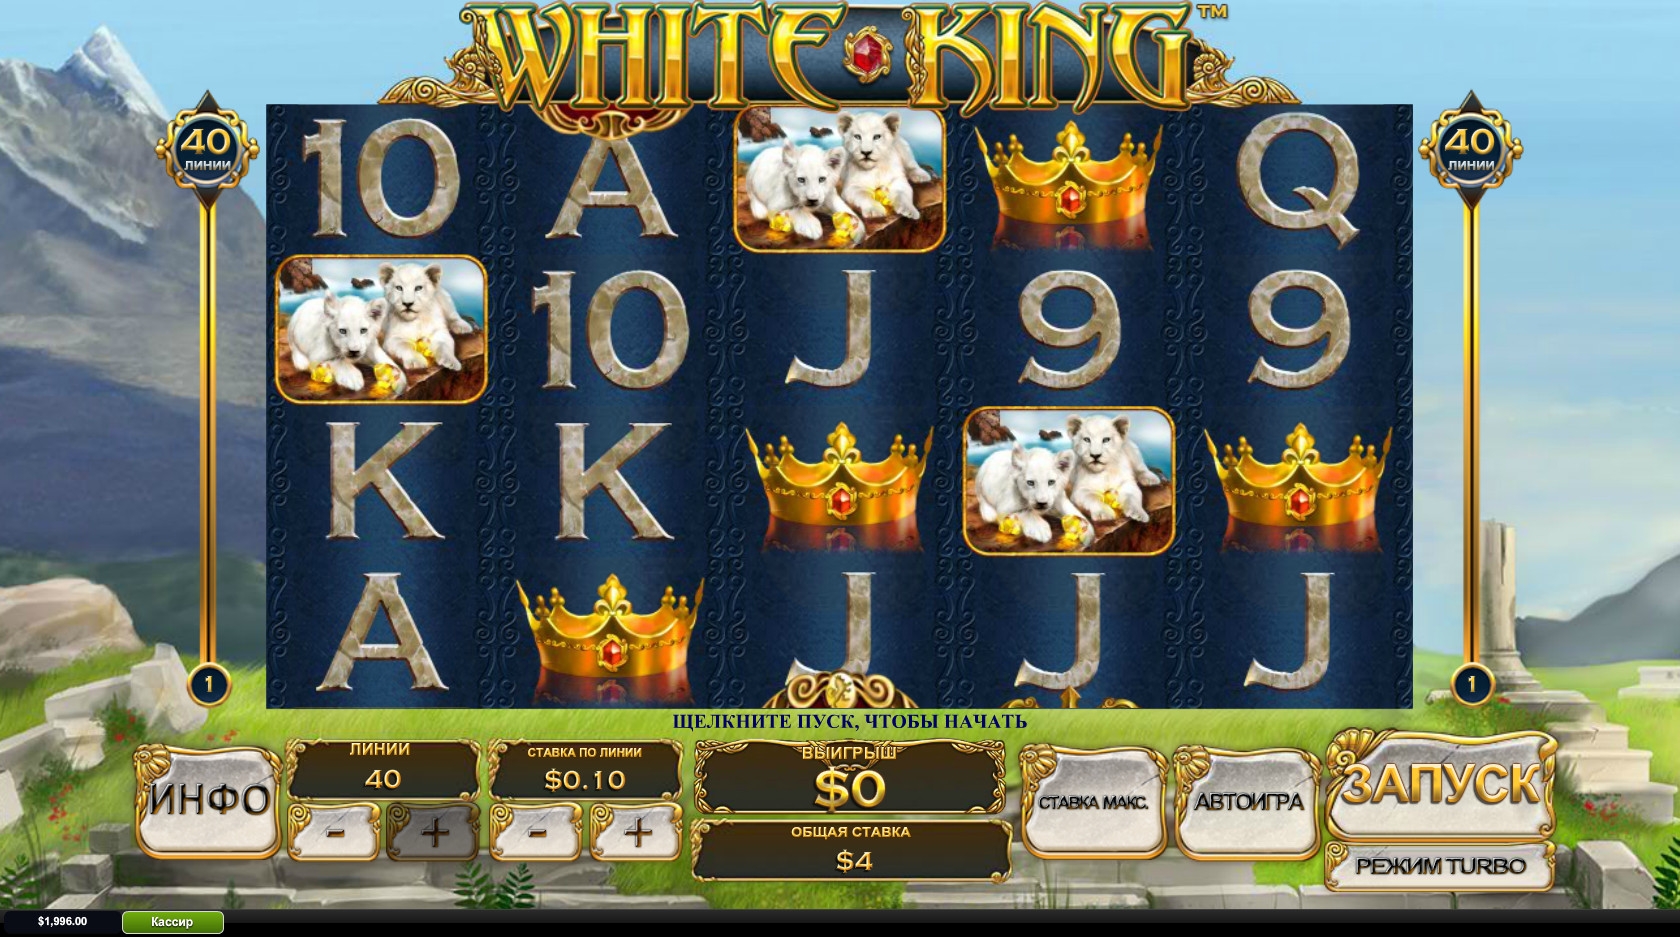 White King (White King) from category Slots